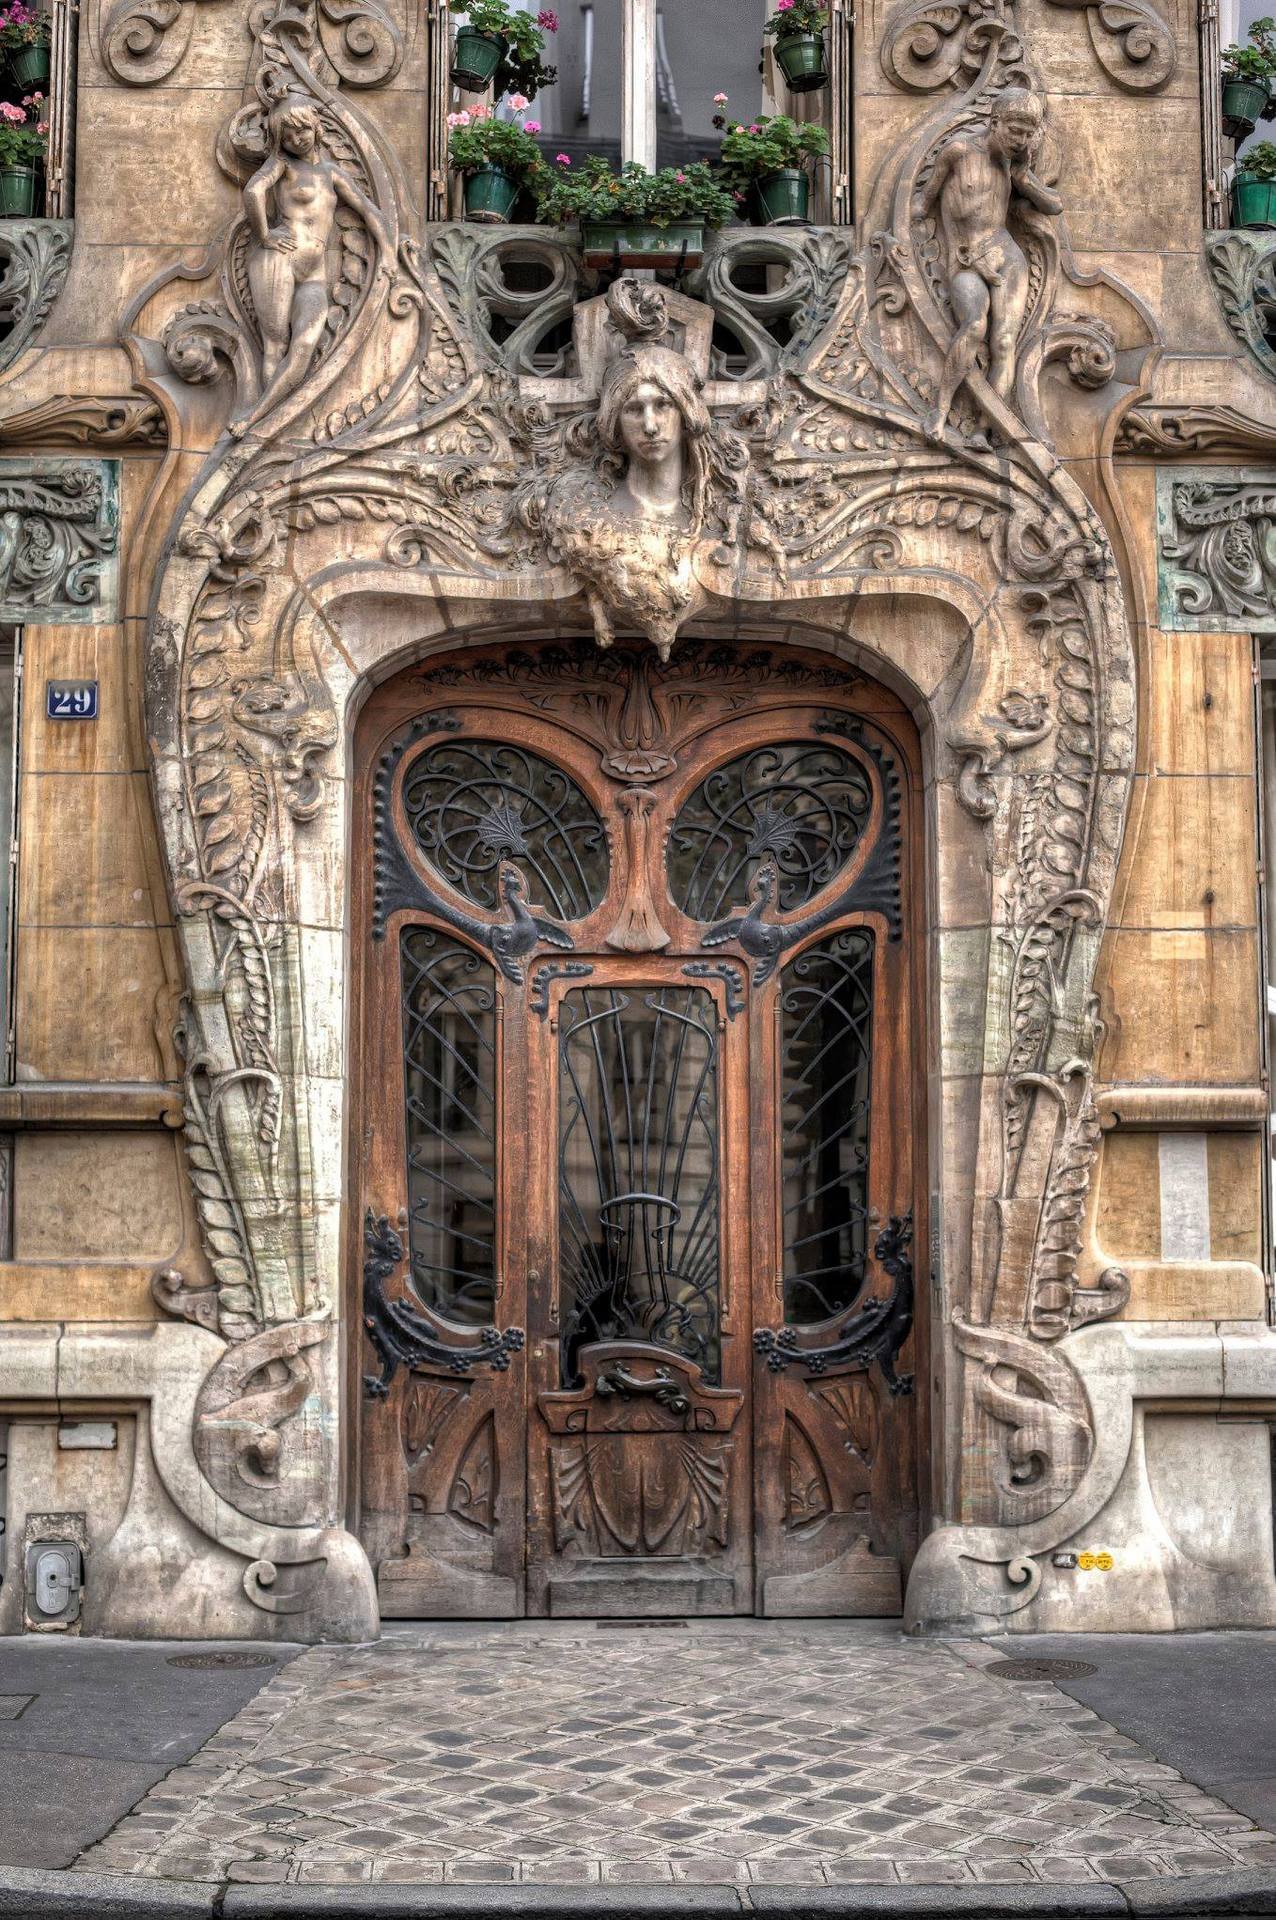 dieselpunkflimflam:
“ steampunktendencies:
“
“The best door in Paris, France
At 29 Avenue Rapp in the 7th arrondissement, very close to the Eiffel Tower. Built between 1899 and 1901, this Art Nouveau masterpiece by Jules Lavirotte is quite striking....